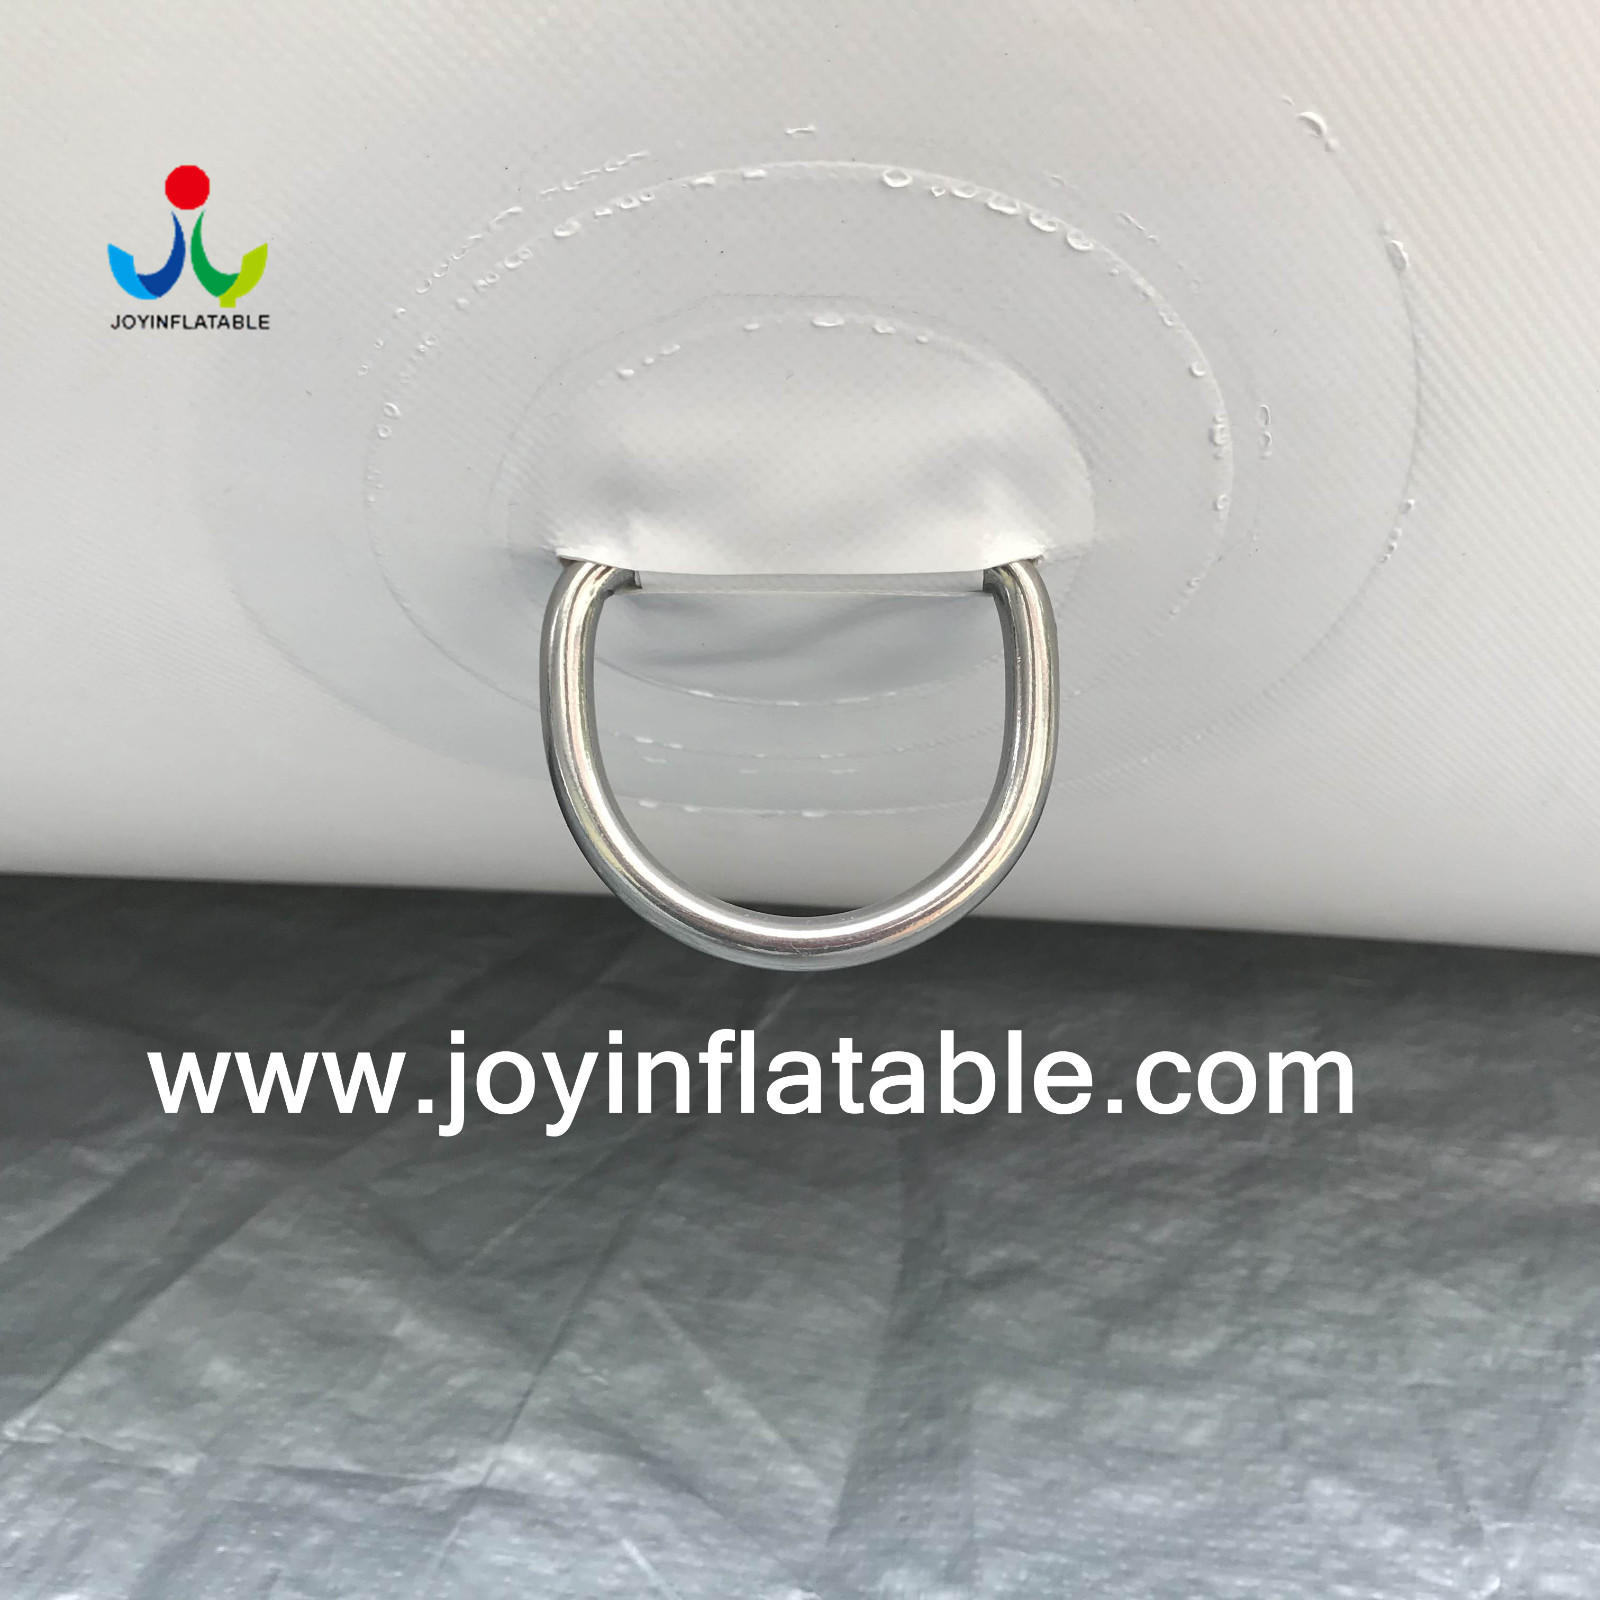 JOY Inflatable New big inflatable tent manufacturer for children